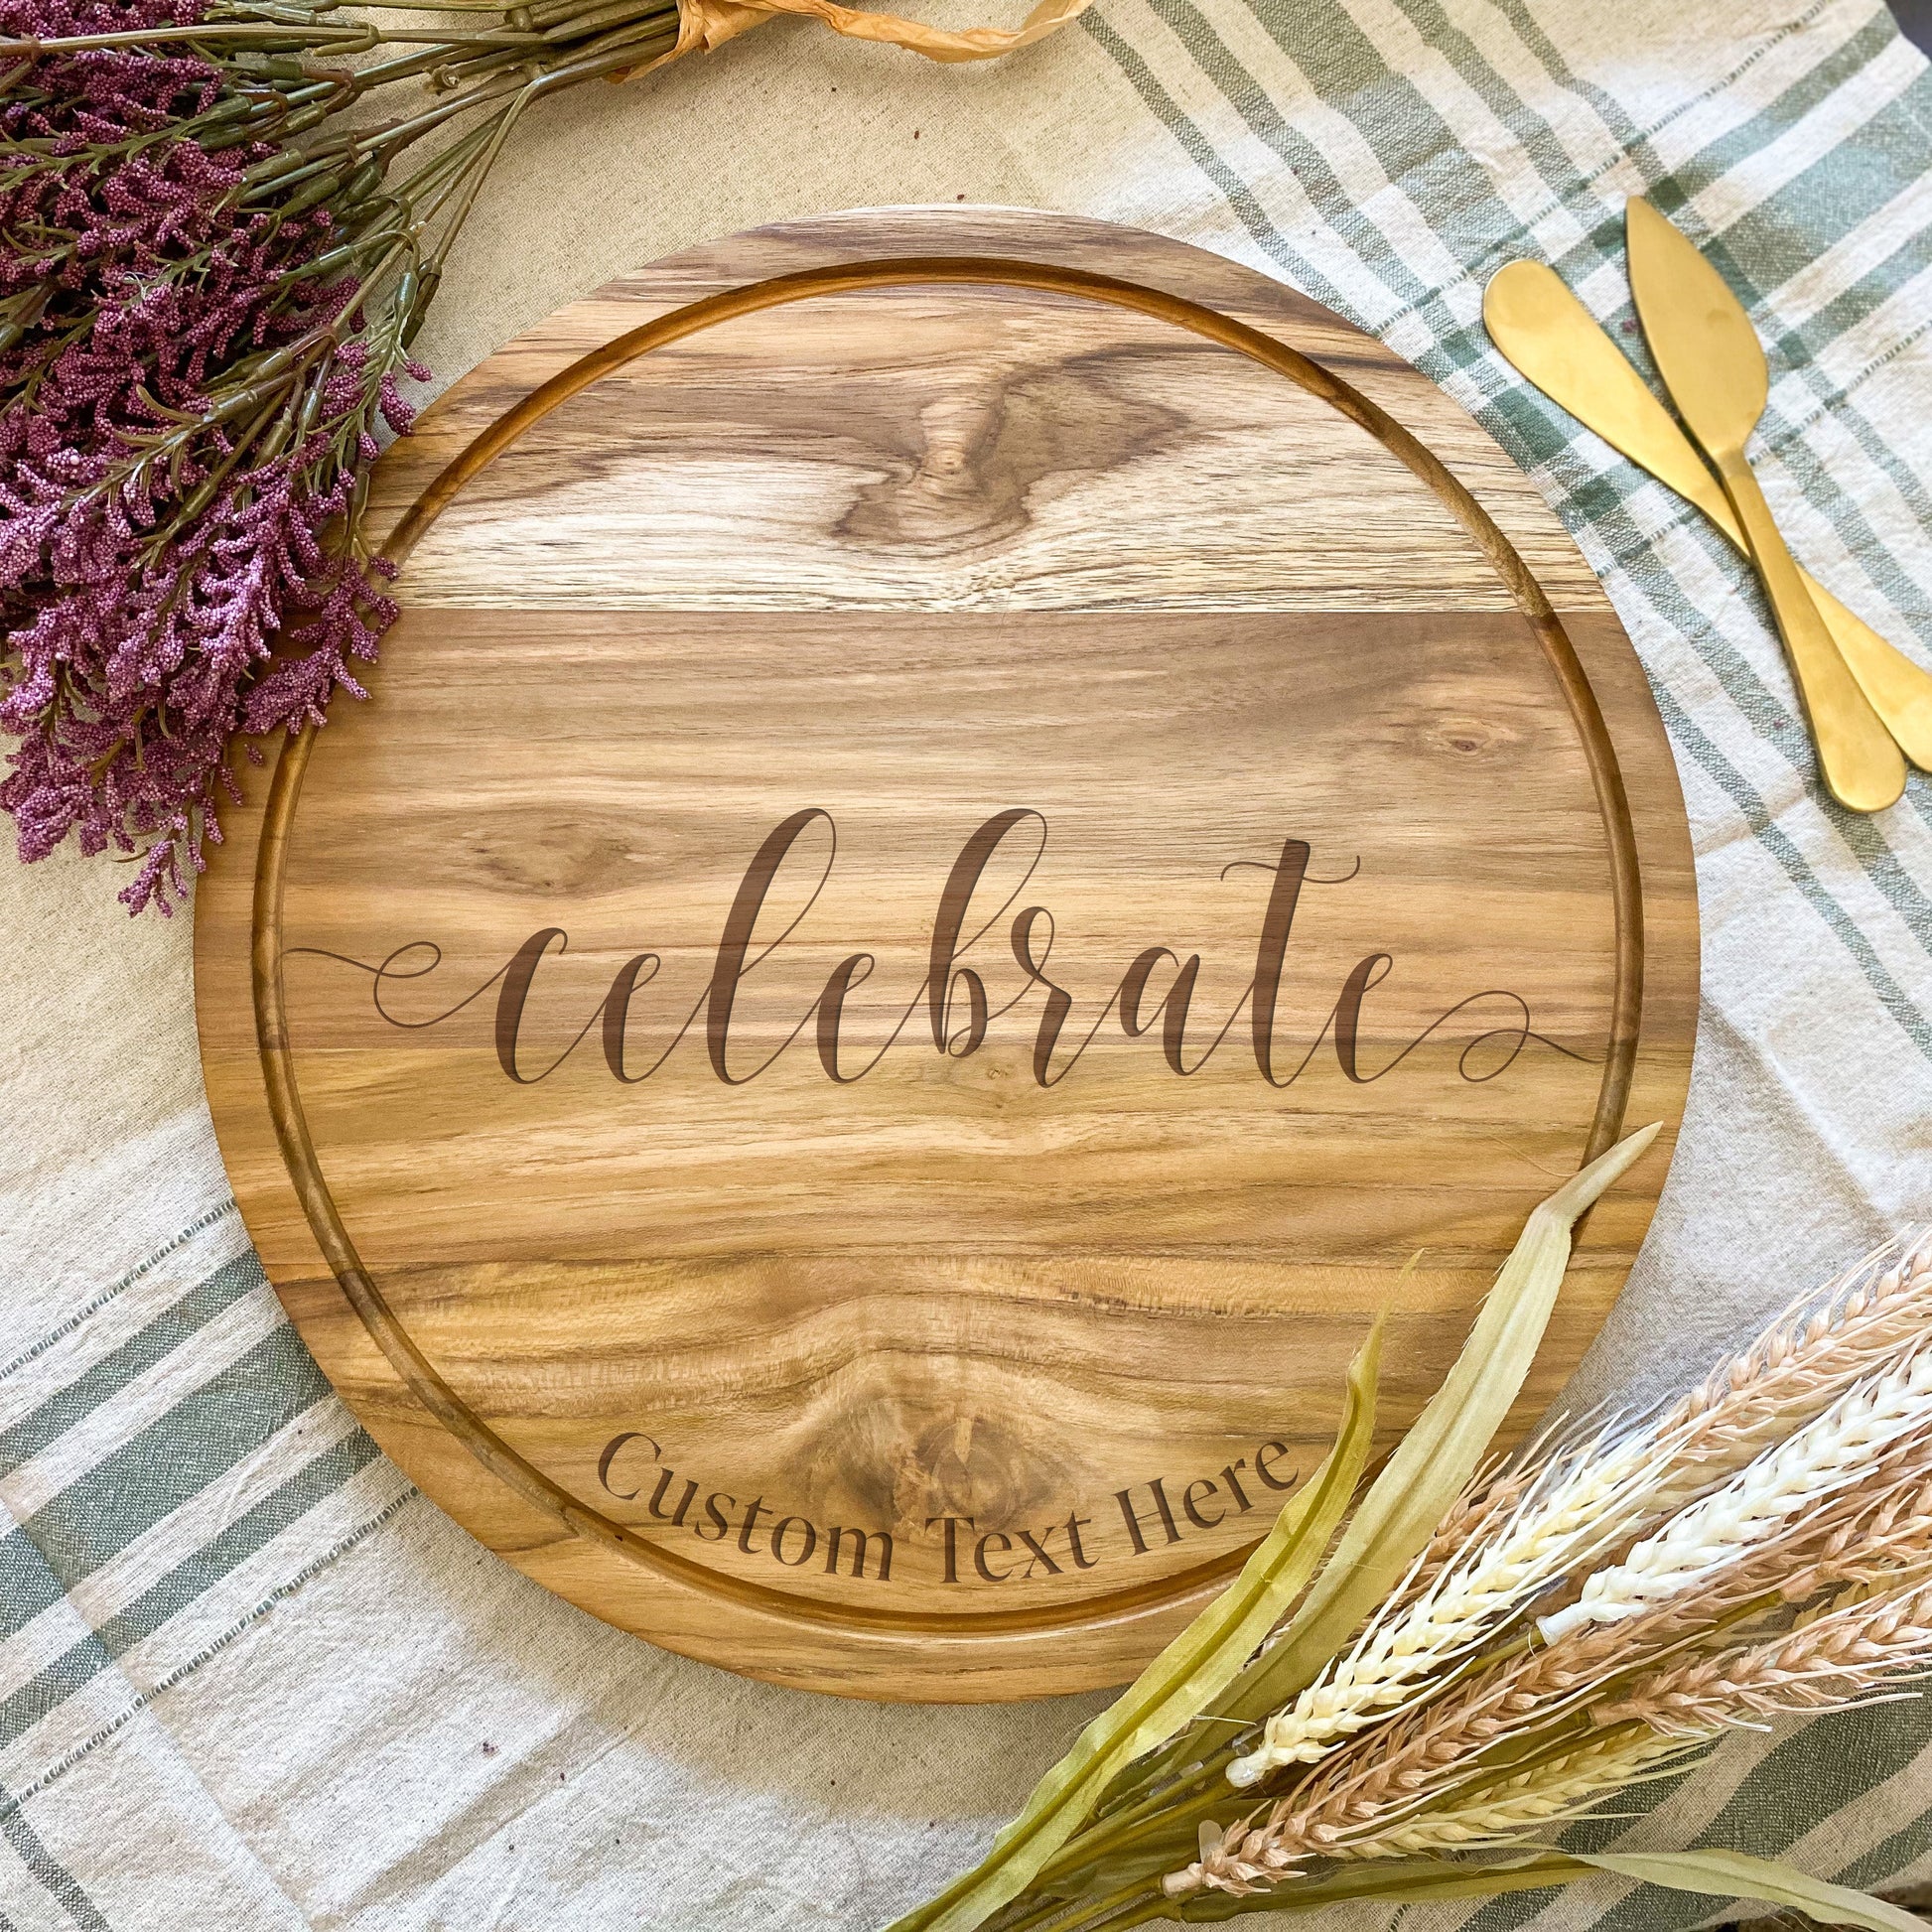 Butter Boards, Cutting Board with Picture | Custom Photo Gifts | Charcuterie Board Engraved